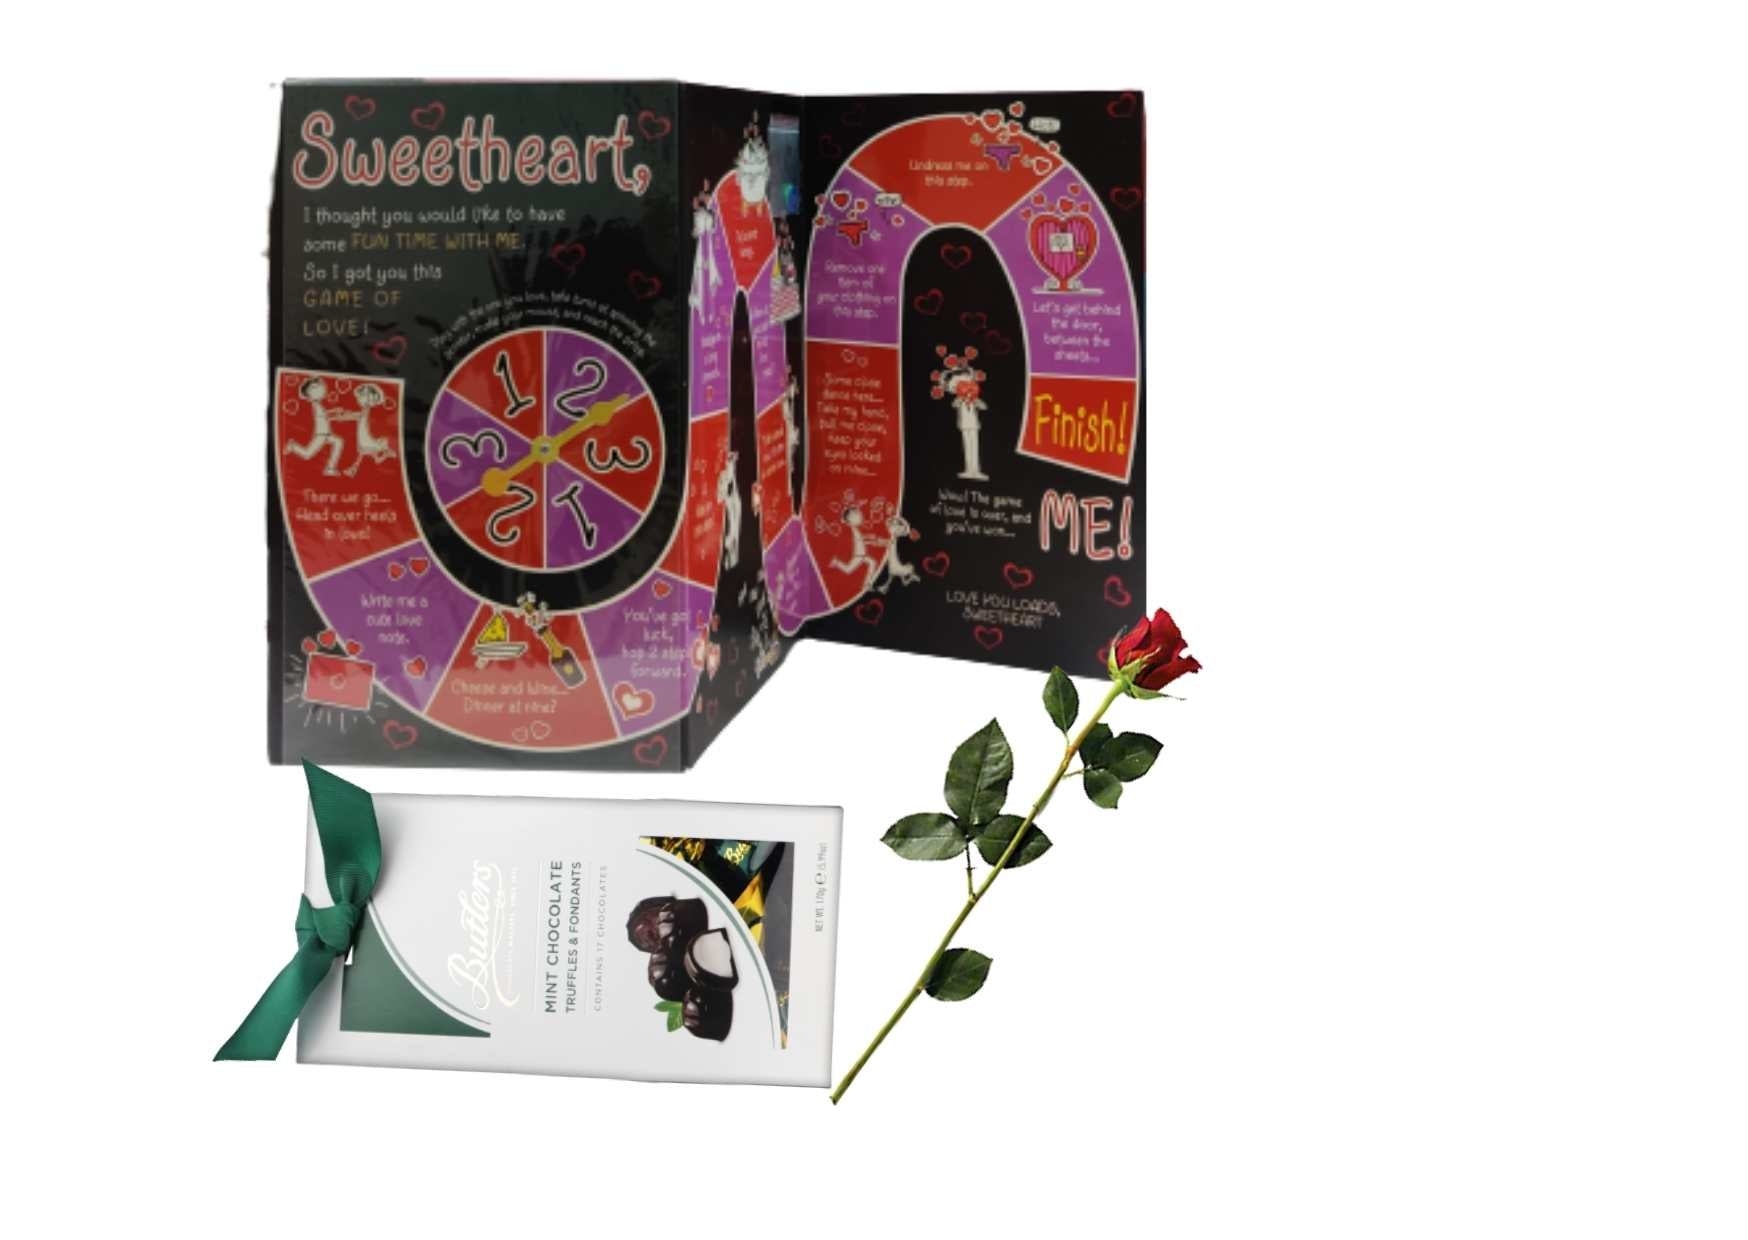 Archies | Archies 3 fold FUN TIME WITH ME  sweetheart card WITH GAME OF LOVE, VALINTINE DAY'S CARDWITH ARTIFICIAL RED ROSE AND BUTLERS MINT CHOCOLATE BOX